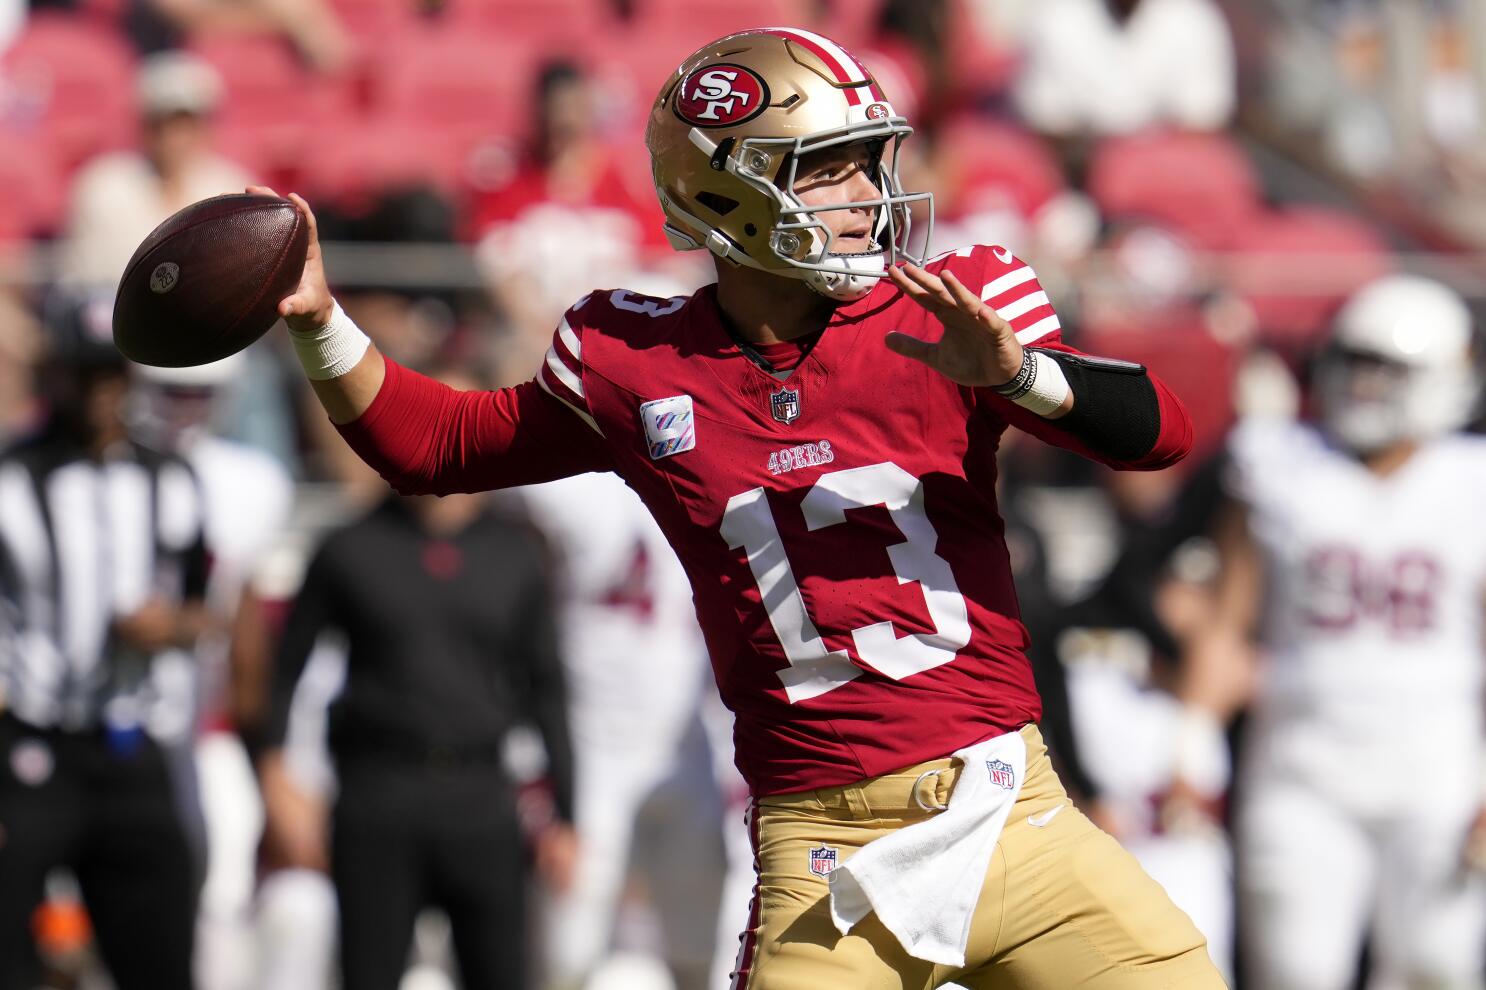 Brock Purdy, Deebo Samuel selected among 49ers team captains for